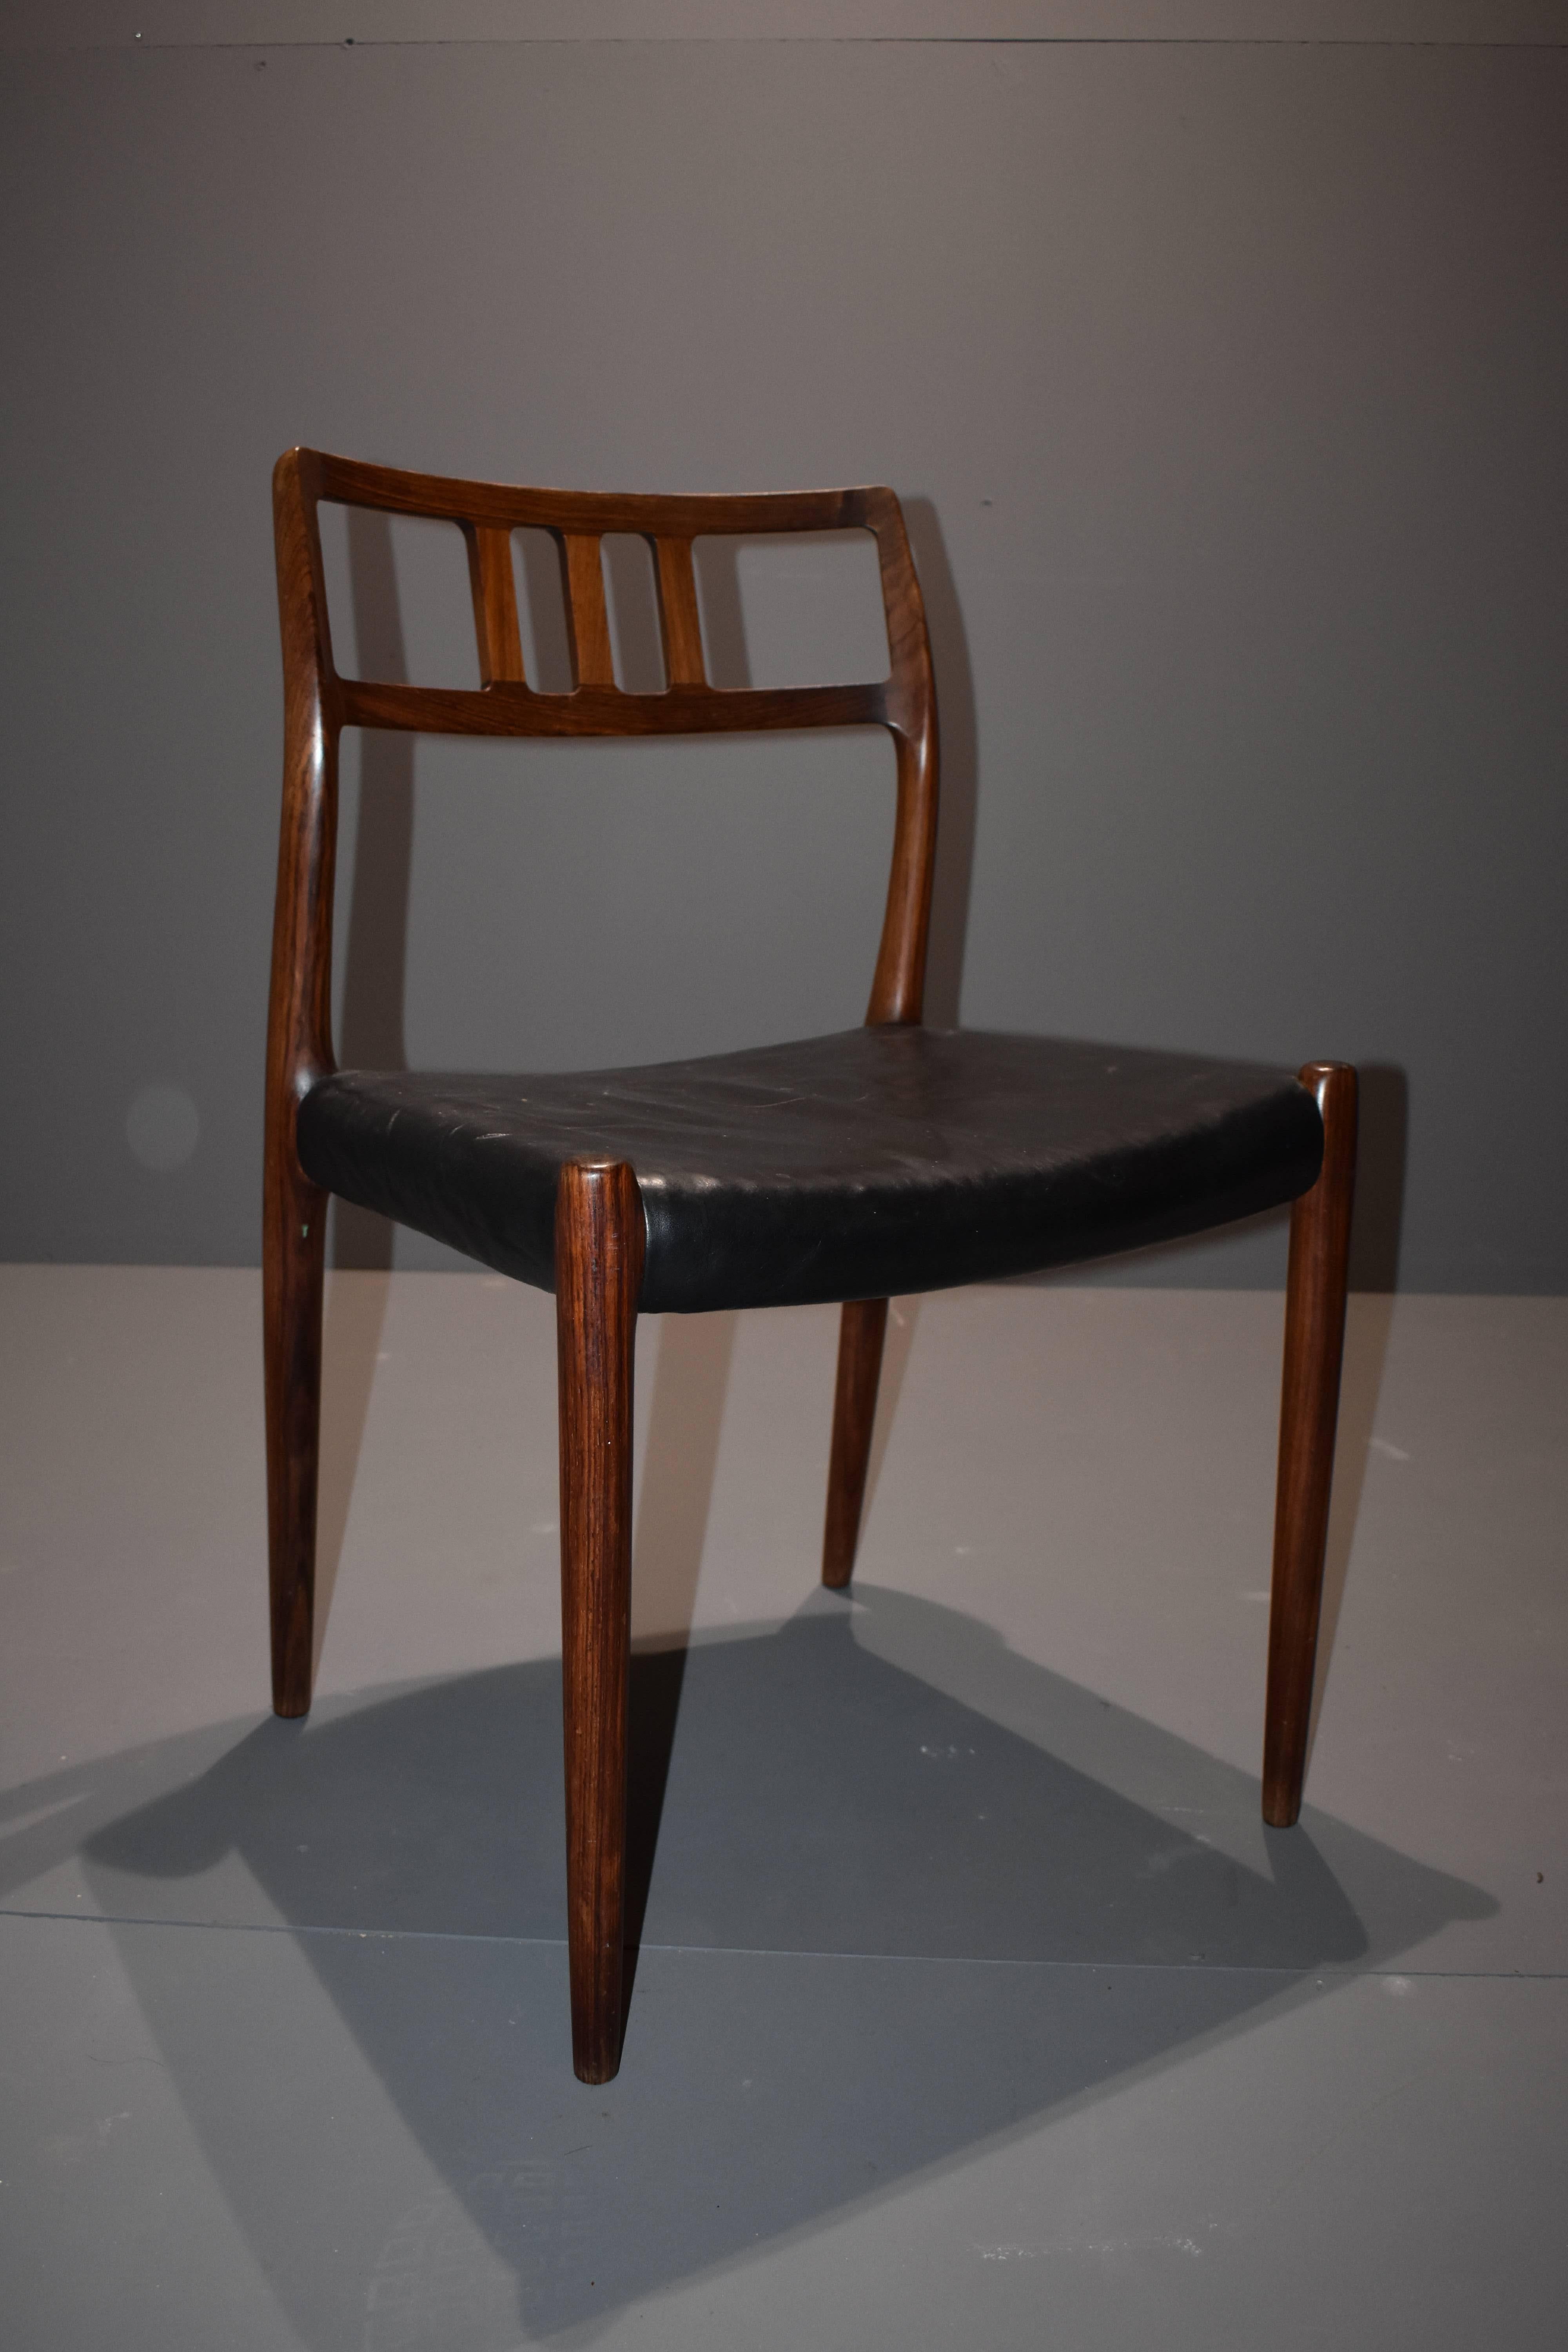 Niels Otto Møller rosewood dining chairs model 79, set of four, with black leather upholstery. One chair has a little bit thicker upholstery. The leather has some patina consistent with age and use.
Frame in rosewood with stunning details.